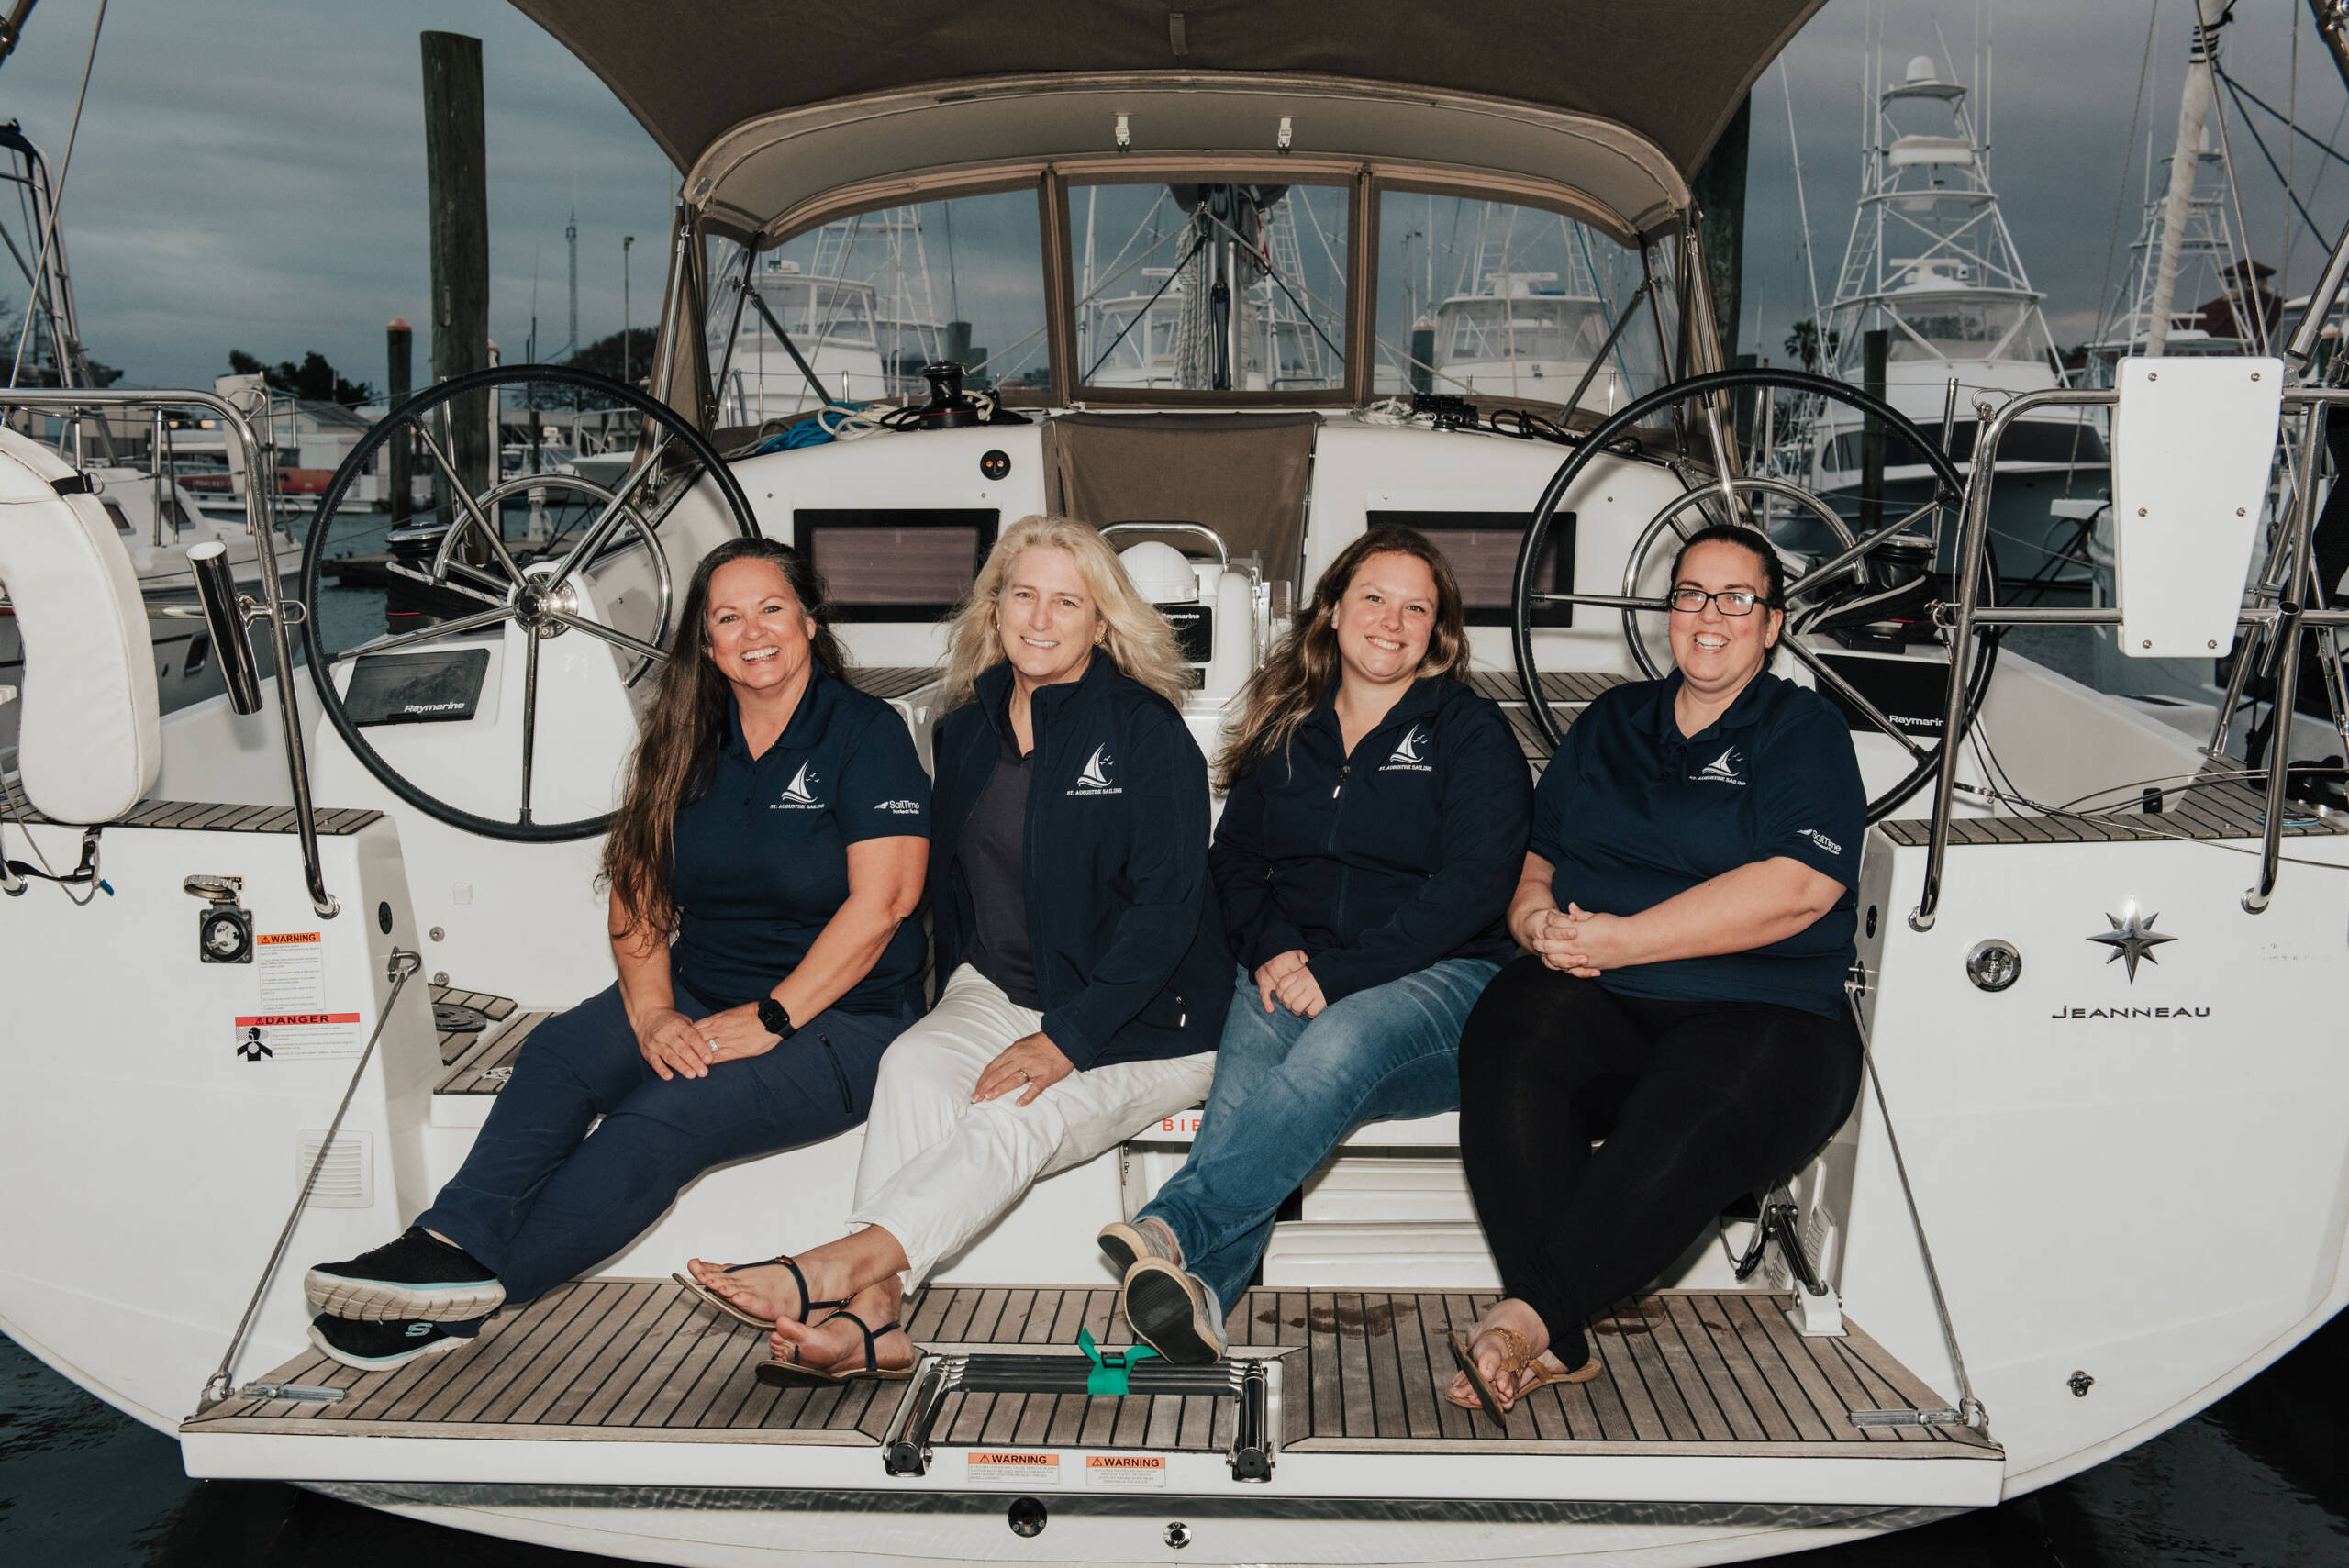 St Augustine Sailing - Women on the Water - Empowering Women - Women sailors - Ladies of St Augustine Sailing